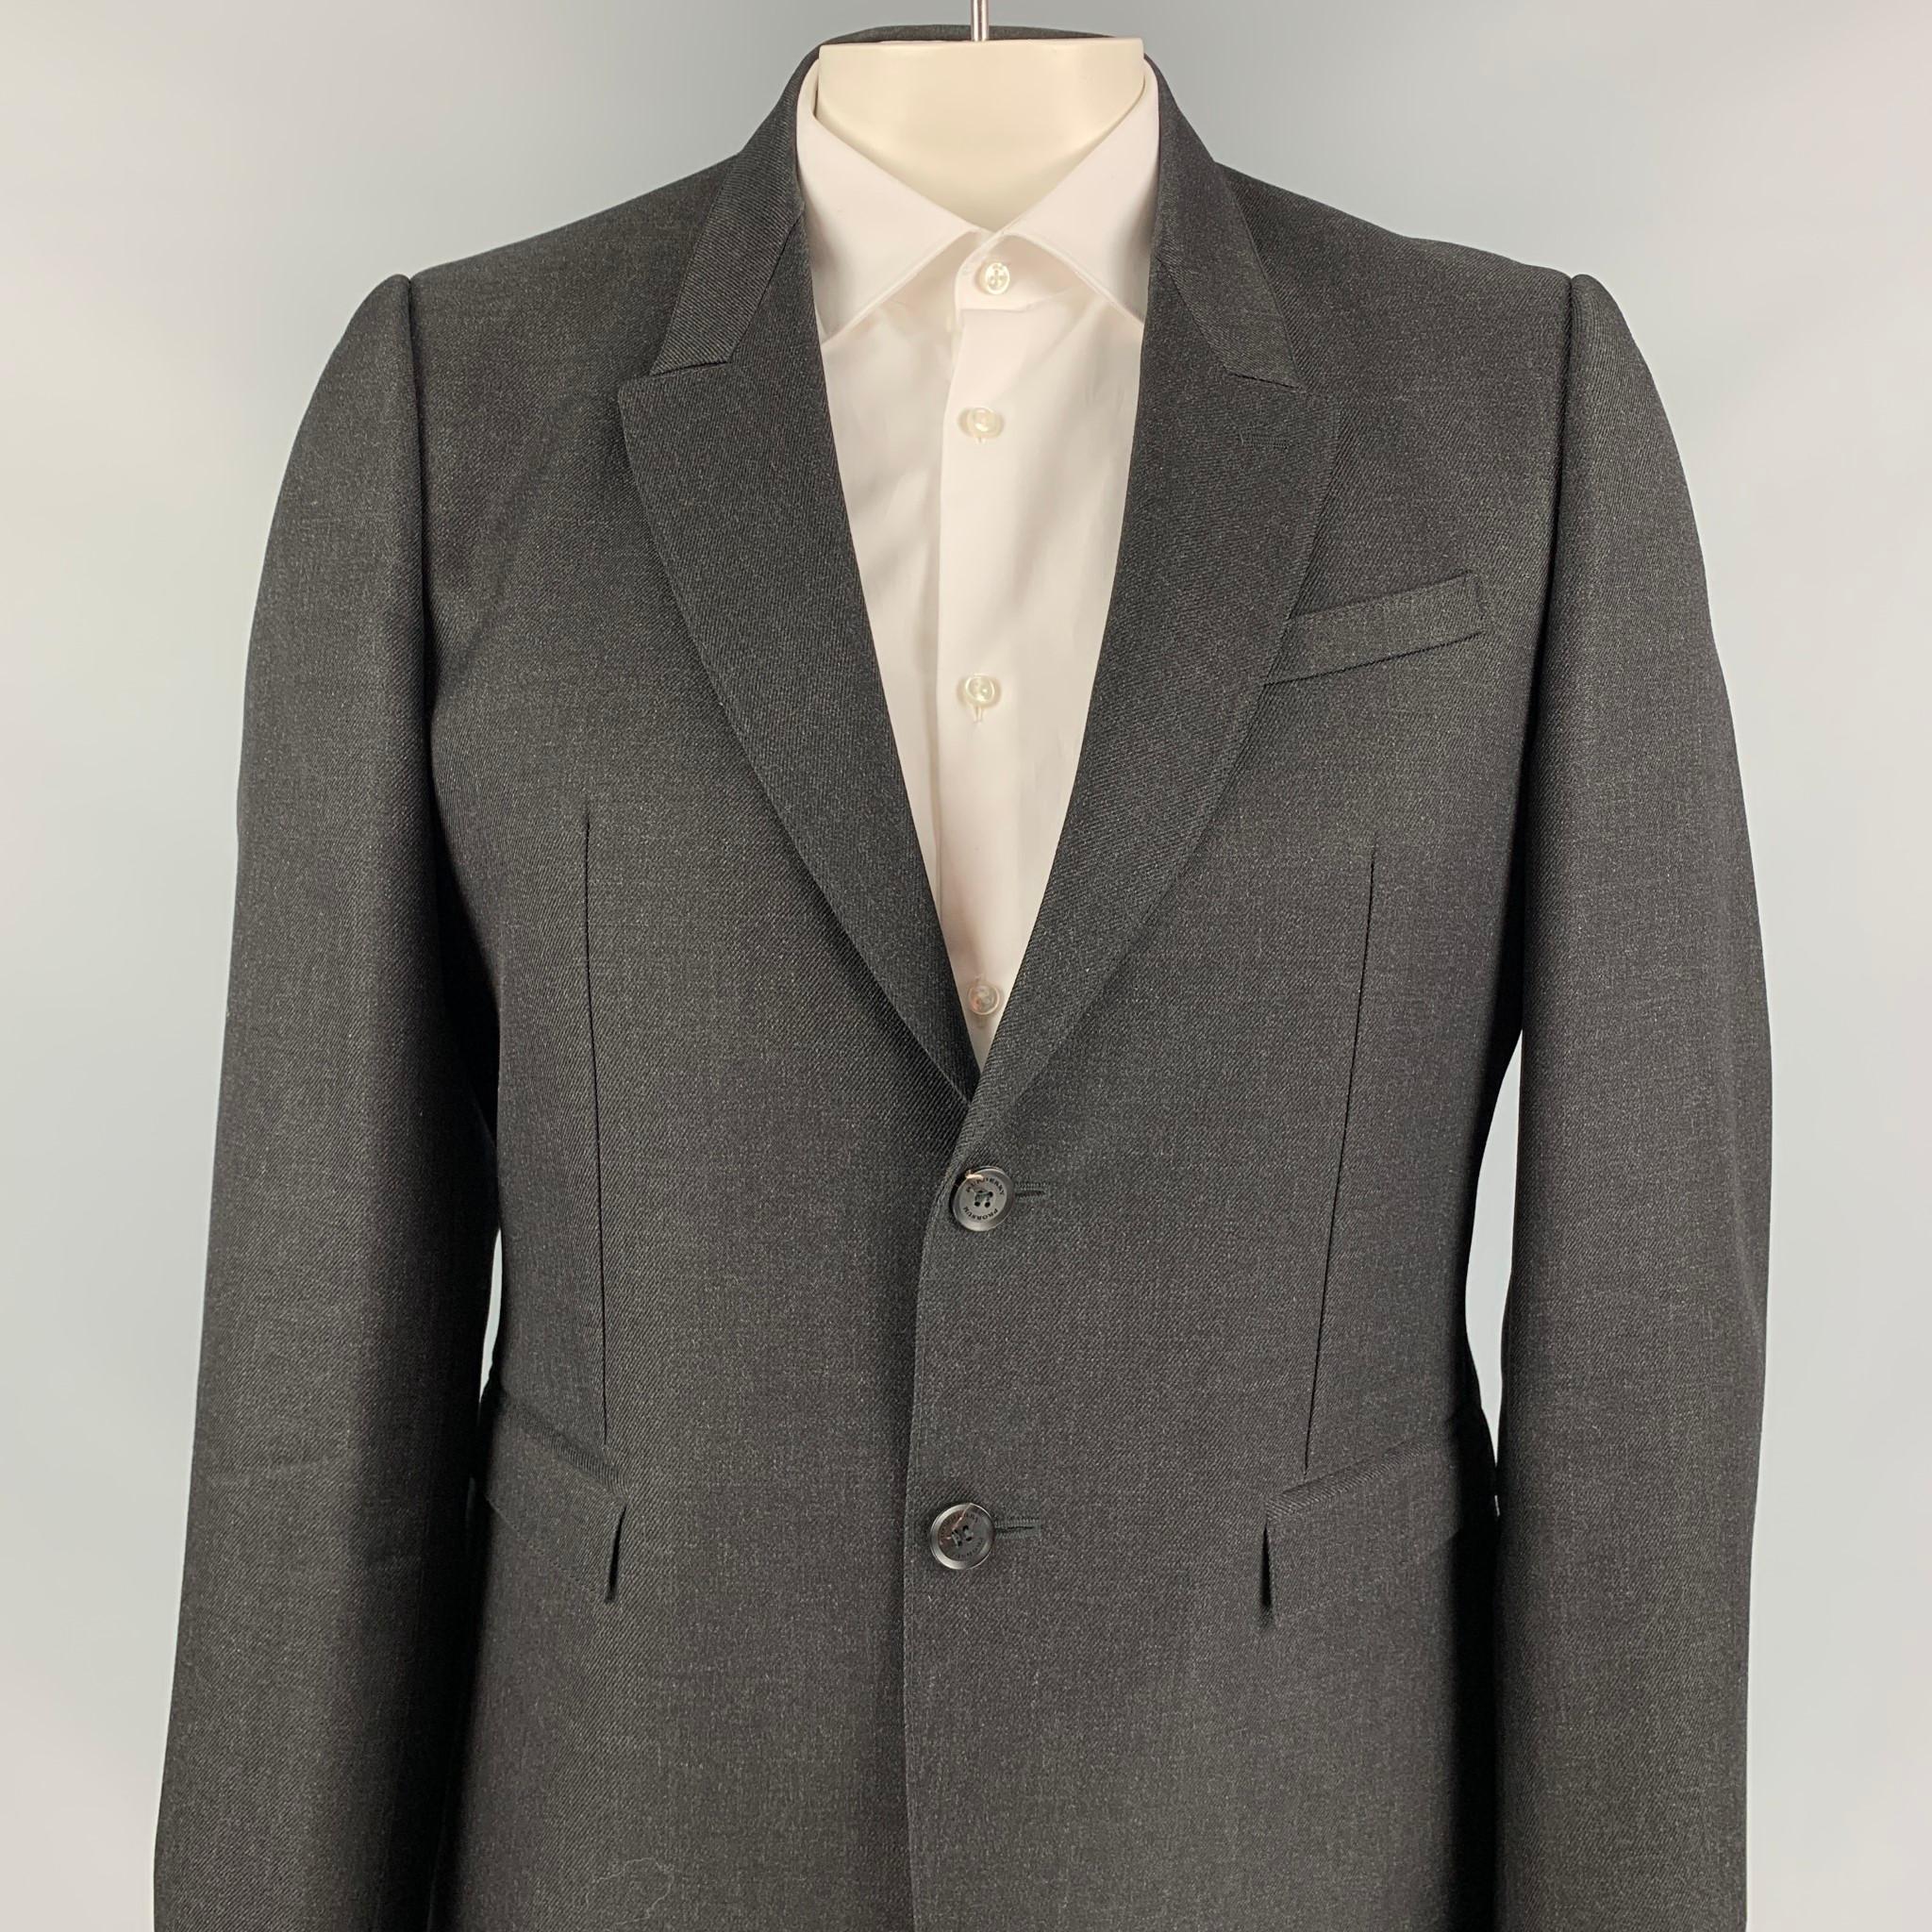 BURBERRY PRORSUM sport coat comes in a charcoal wool with a full liner featuring a peak lapel, flap pockets, double back vent, and a two button closure. Made in Italy.

Excellent Pre-Owned Condition.
Marked: 54

Measurements:

Shoulder: 18